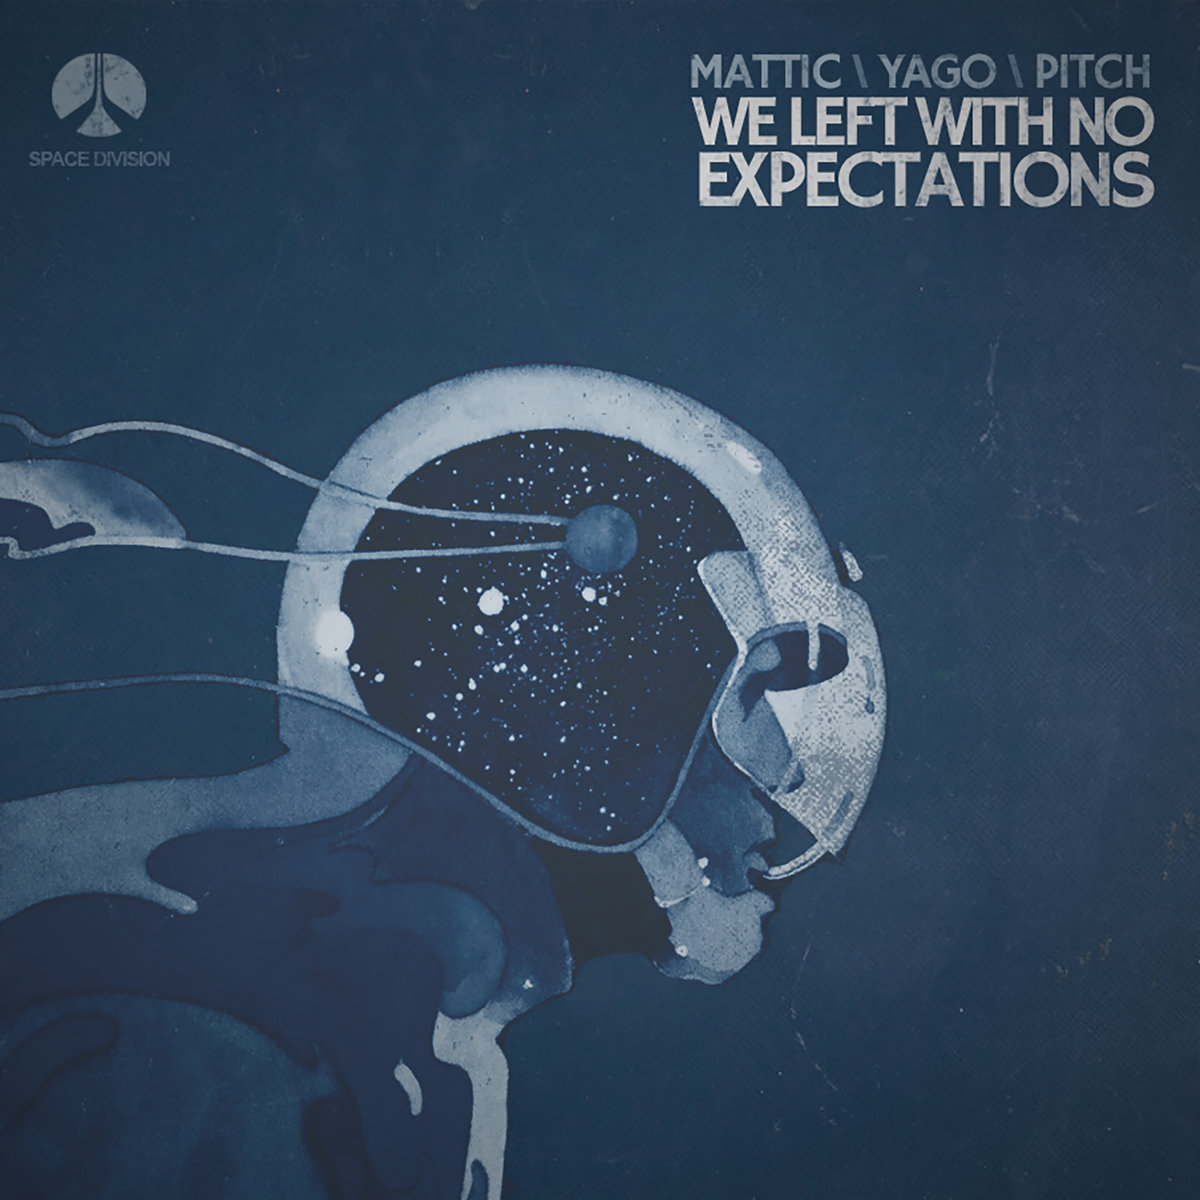 Mattic__yago___pitch_presentan__we_left_with_no_expectations_ep_